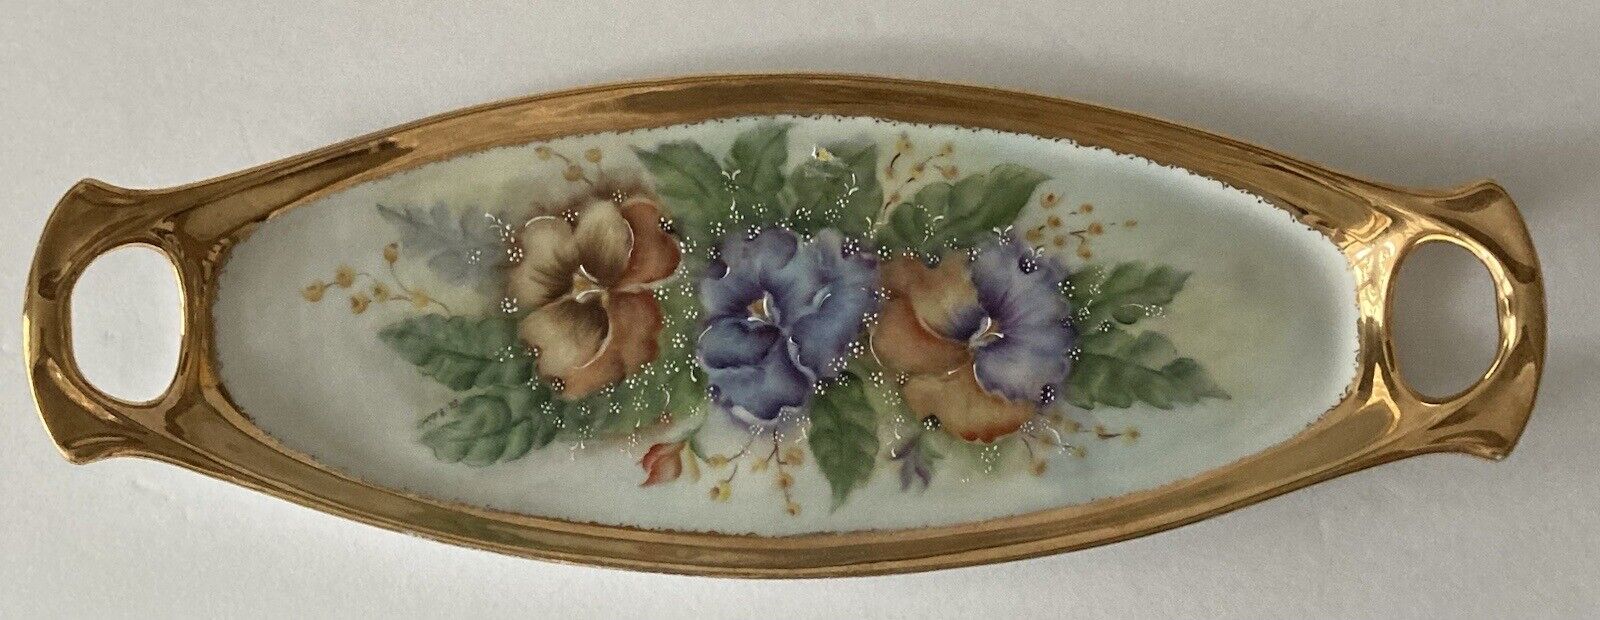 Antique Limoges Giraud France Flowers Dresser Vanity Tray Hand Painted .